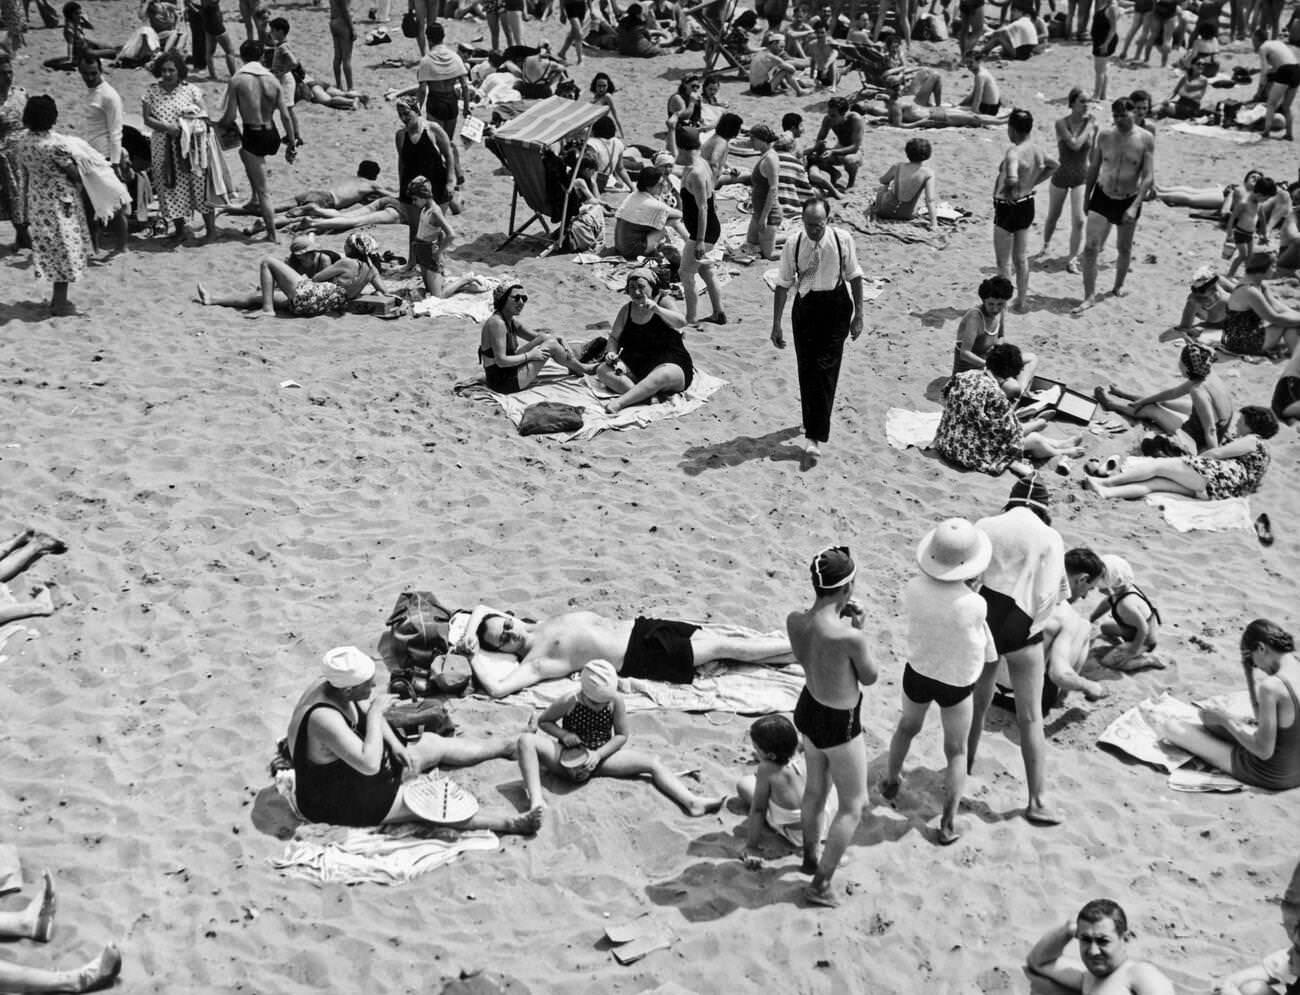 Bathers On The Sands At Coney Island, Brooklyn, July 1938